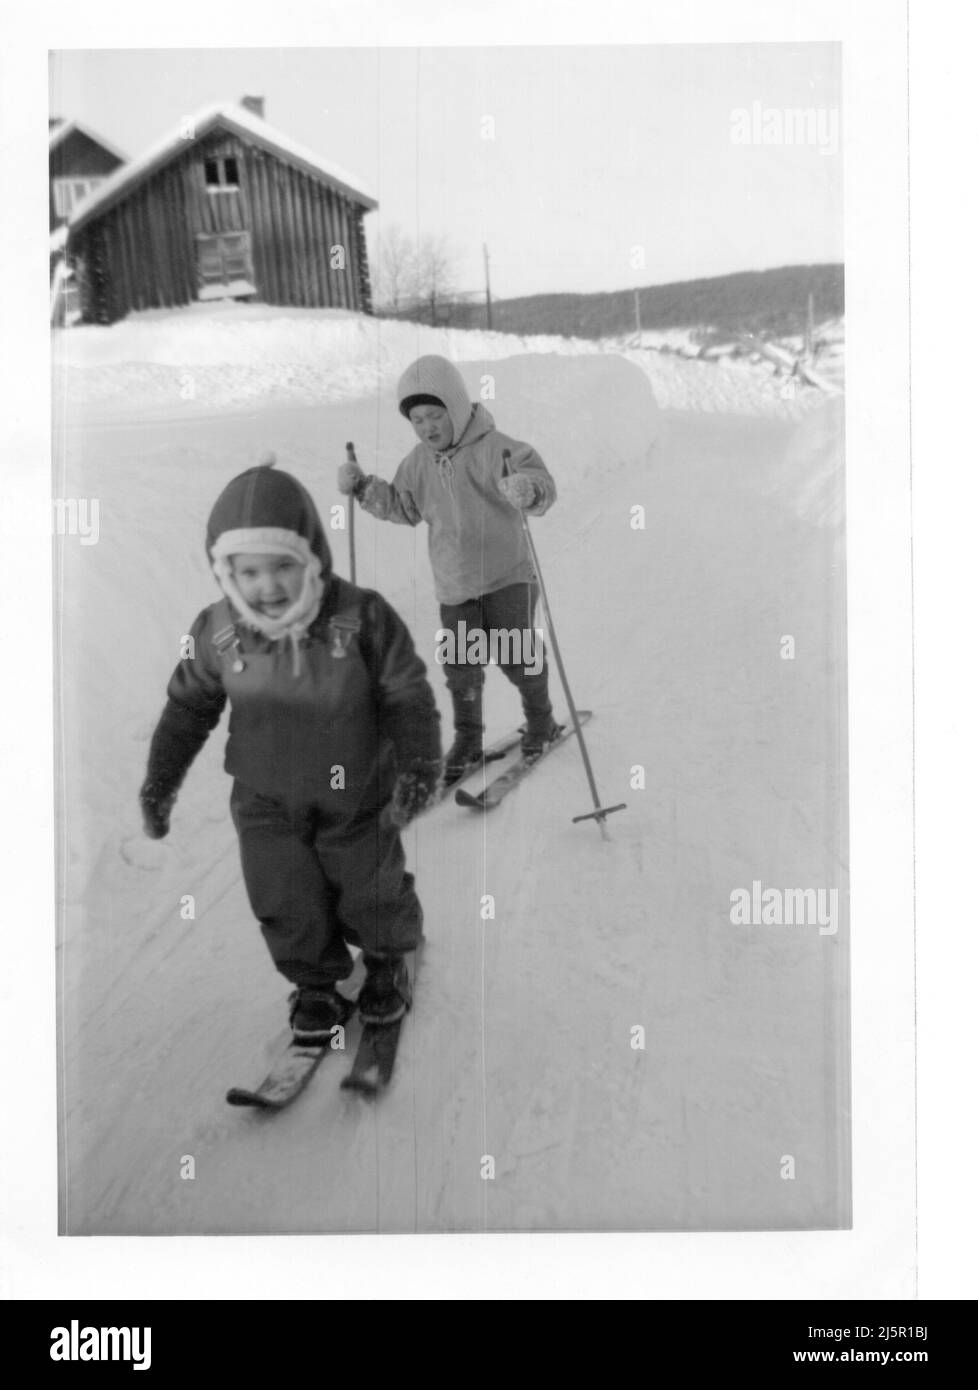 1960's authentic vintage photograph of two children skiing, Sweden Stock Photo